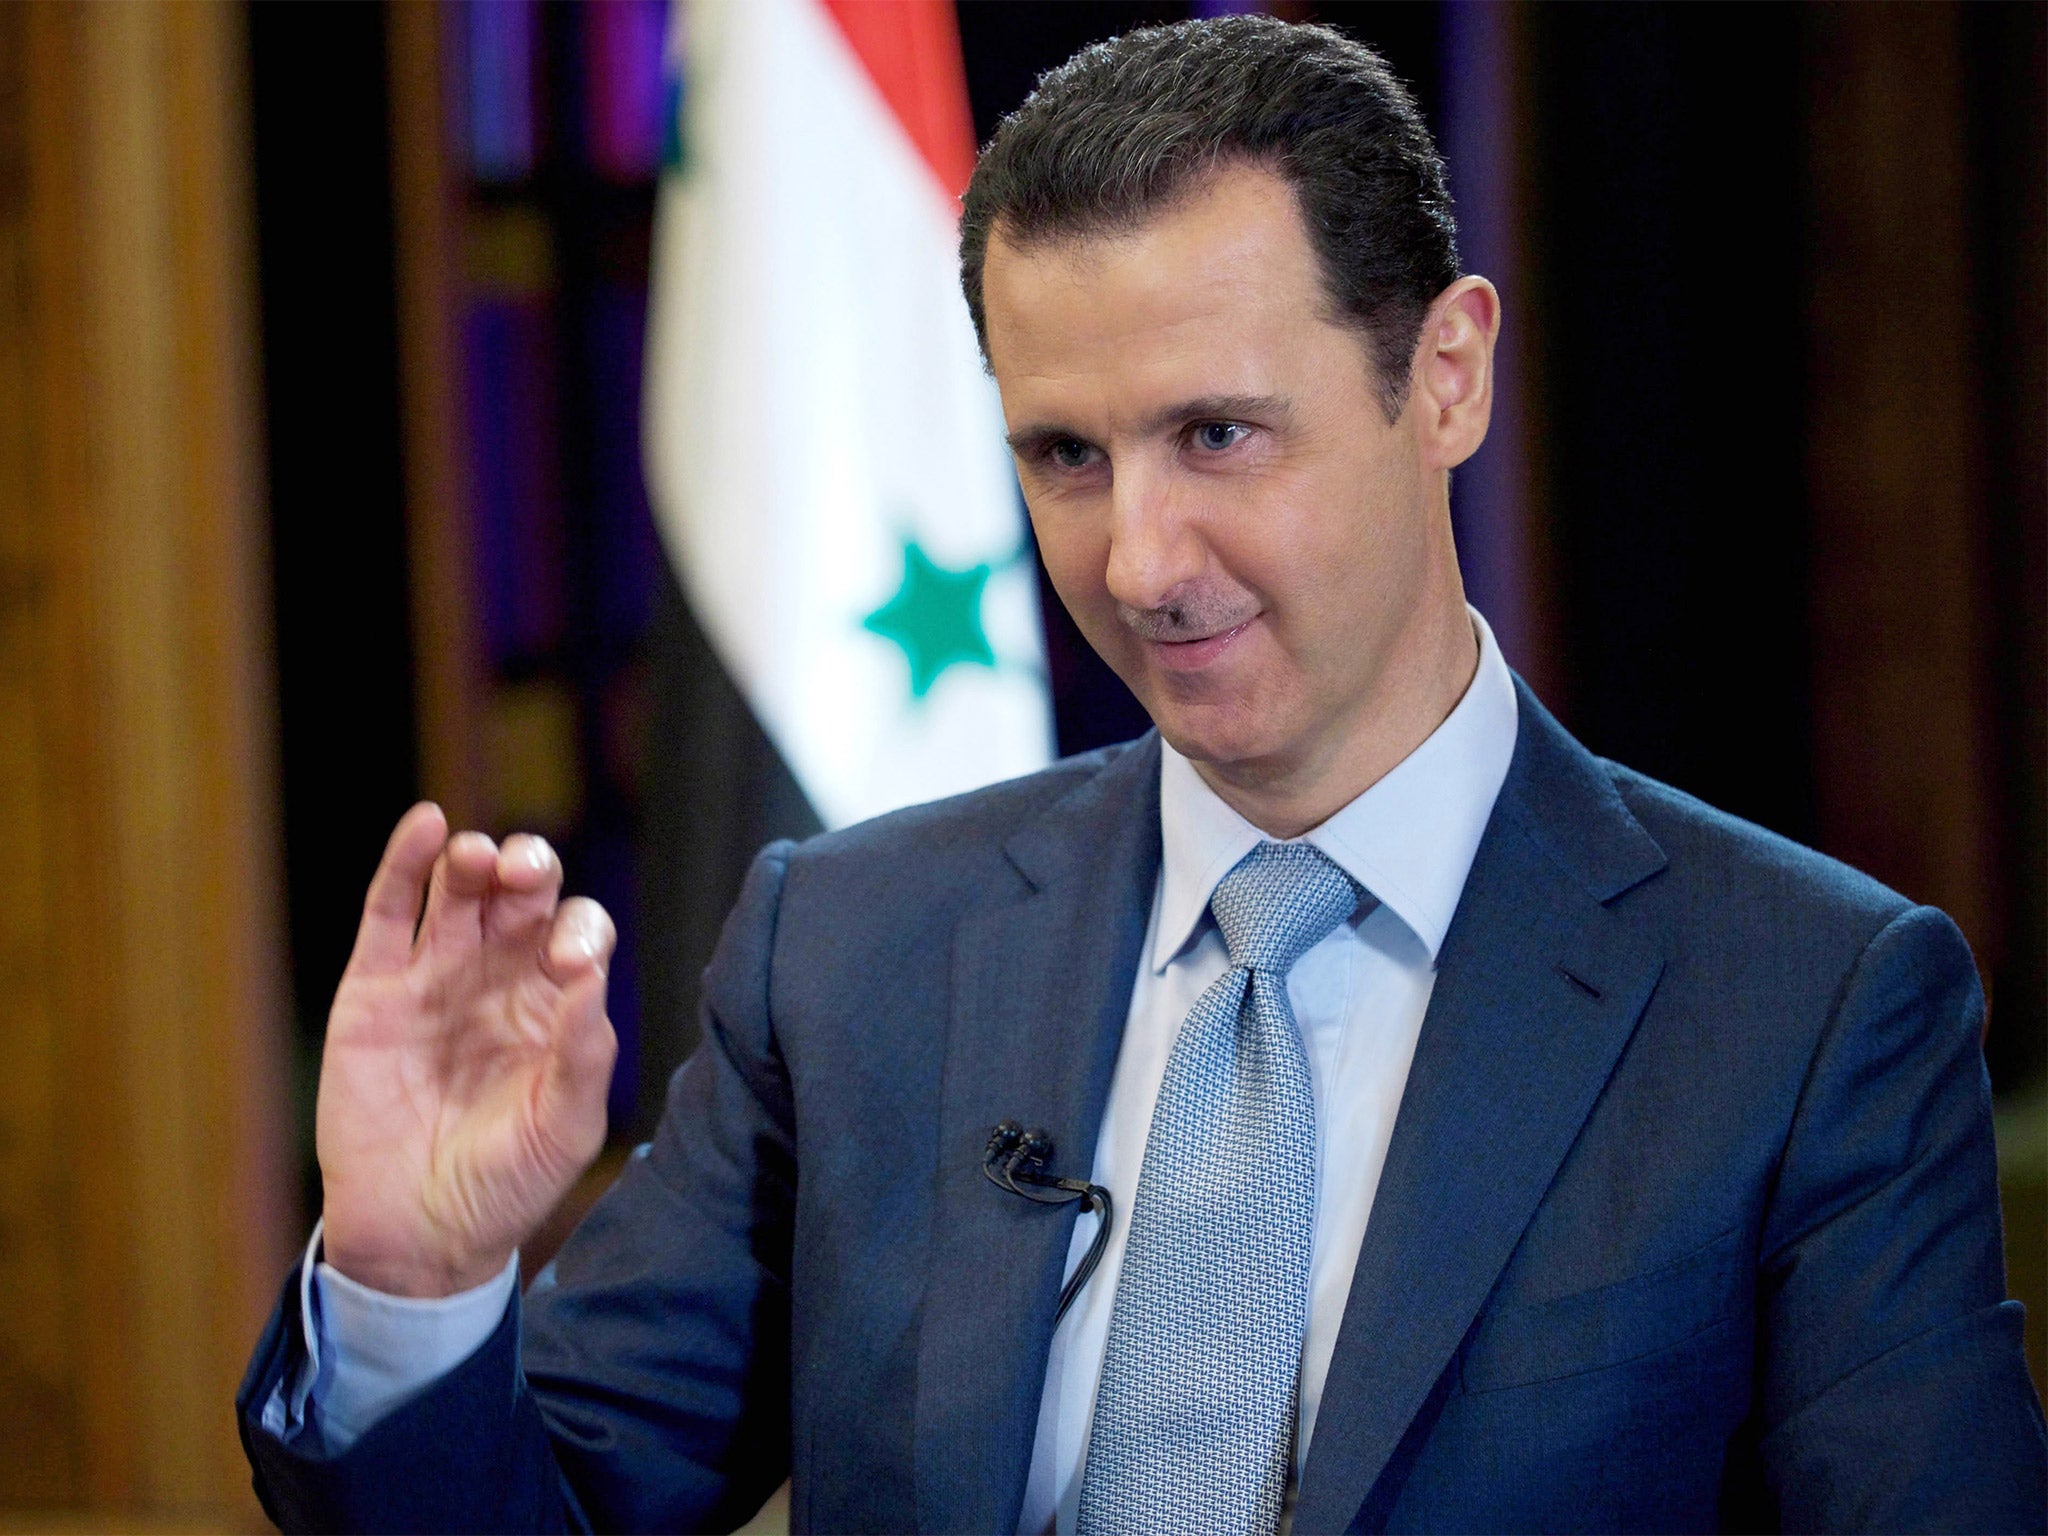 Assad’s moderate tone in interviews has been a PR coup